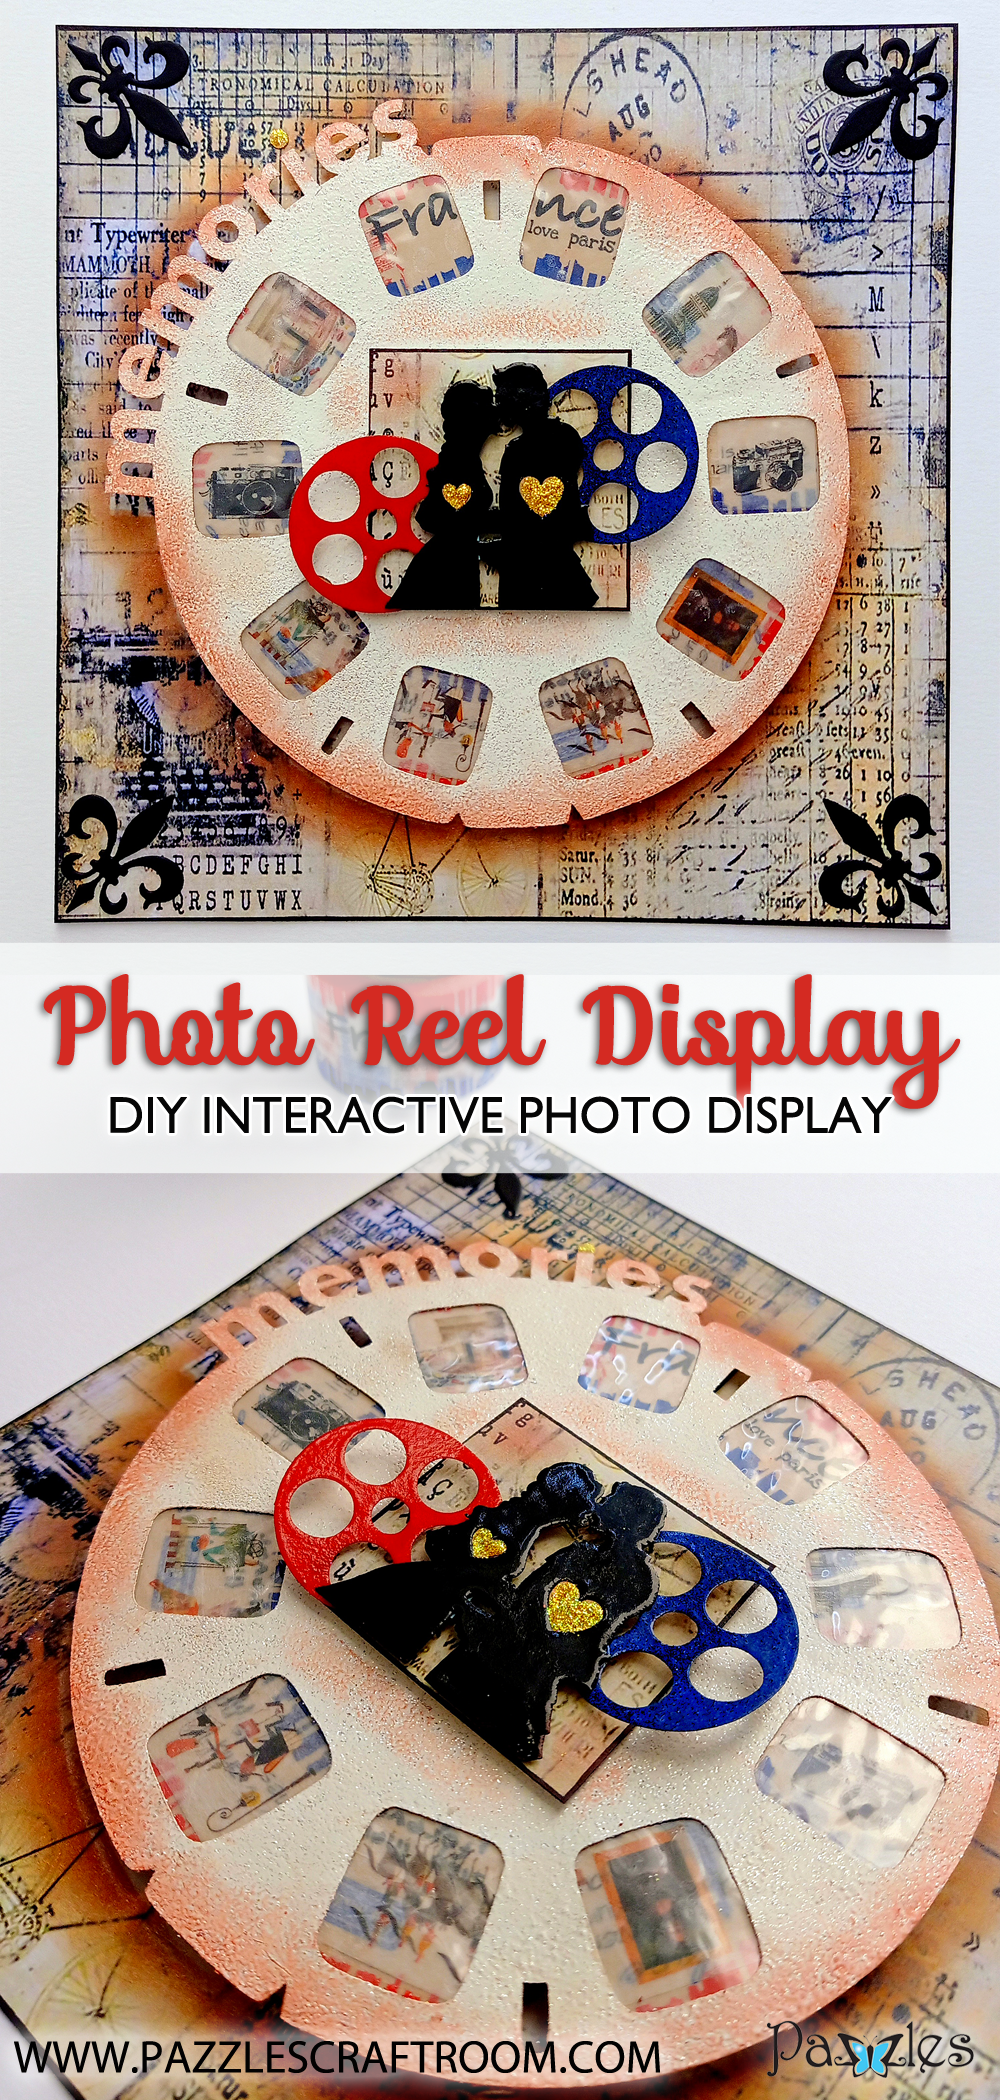 Pazzles DIY Interactive Photo Reel Display with instant SVG download. Compatible with all major electronic cutters including Pazzles Inspiration, Cricut, and Silhouette Cameo. Design by Zahraa Darweesh.